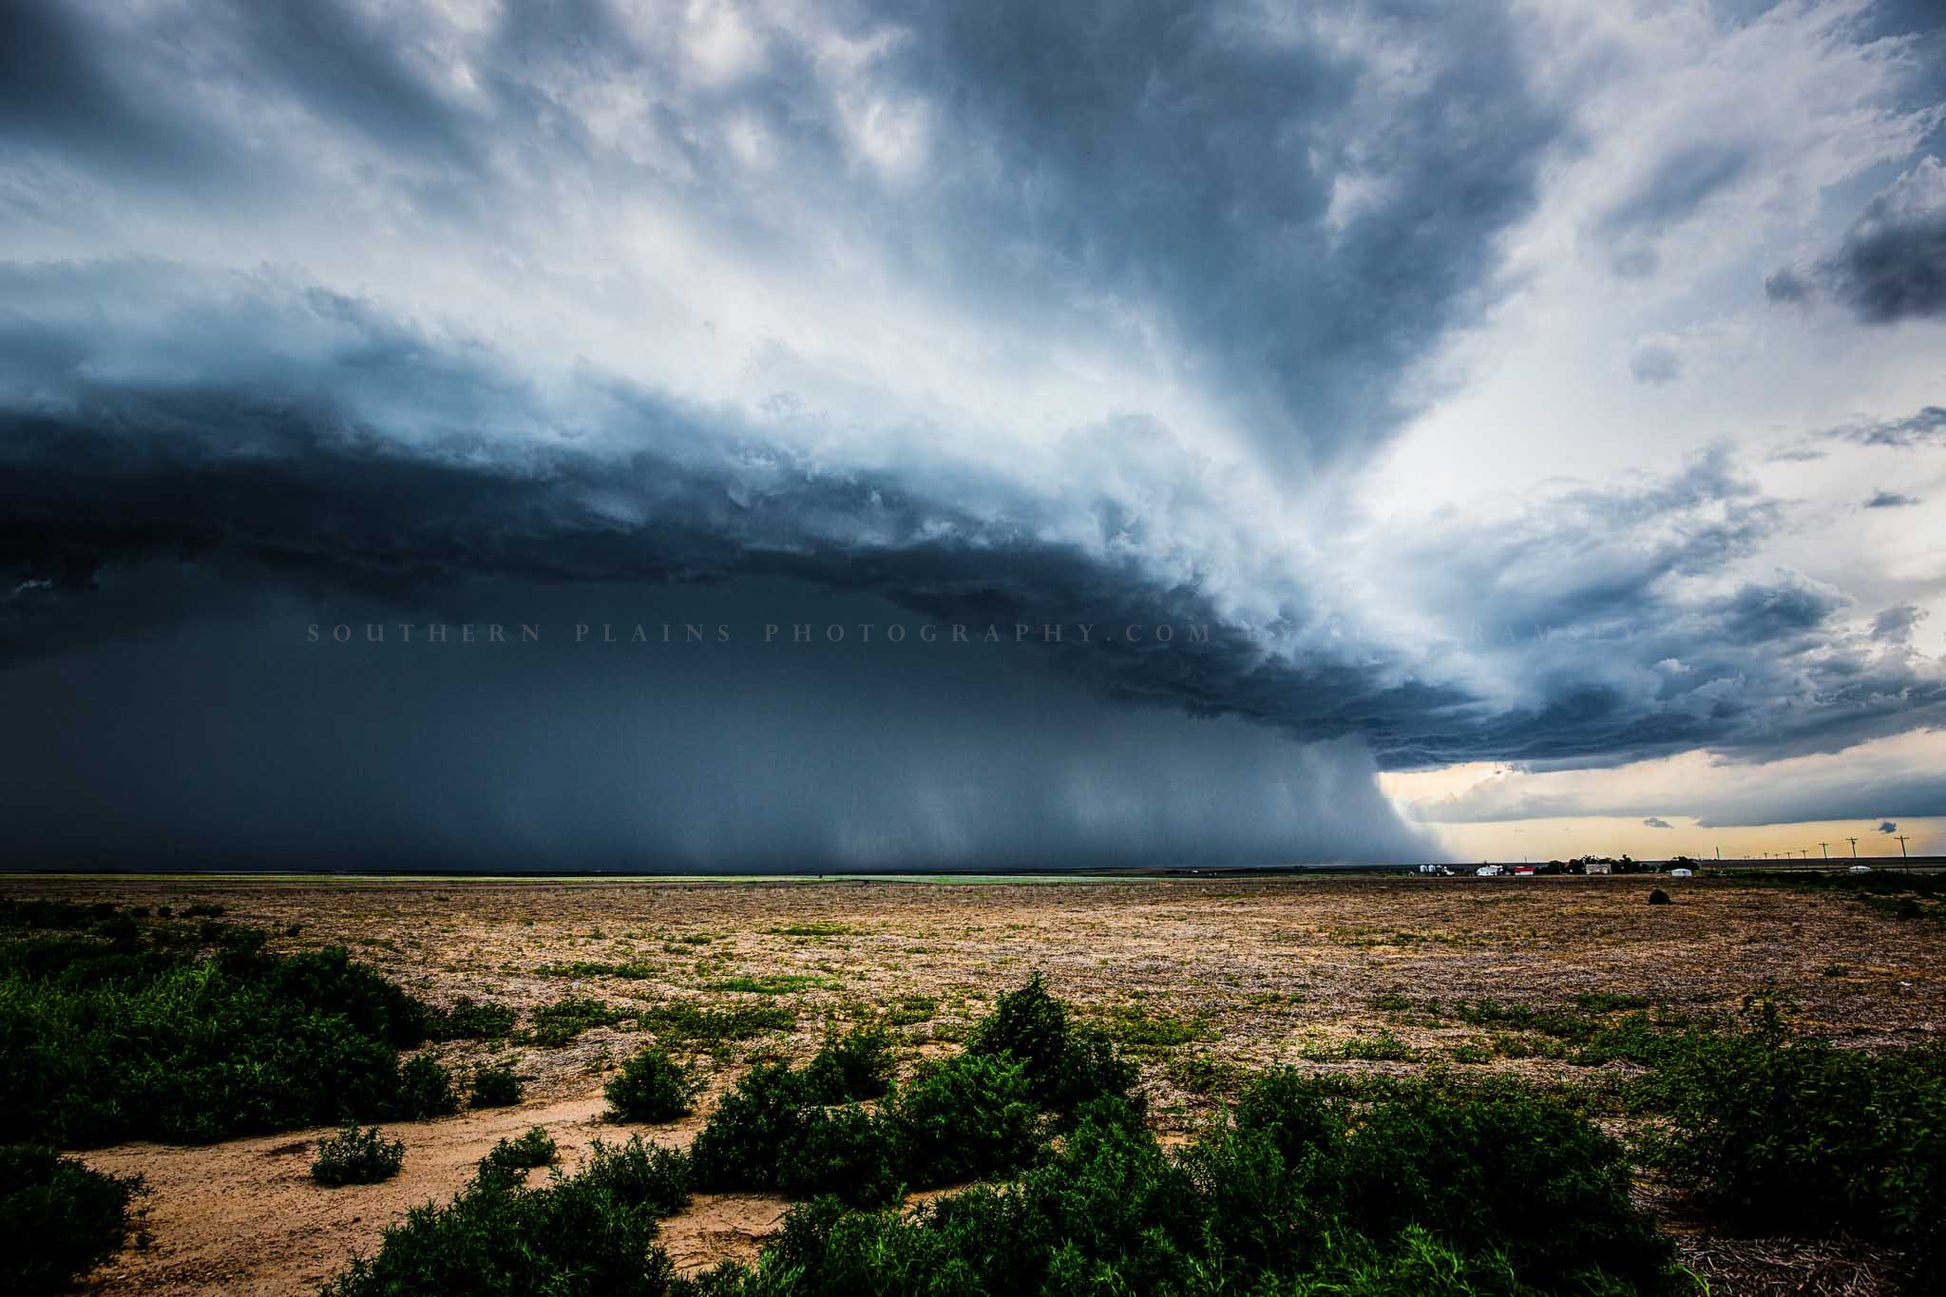 Storm photography print of a drought busting thunderstorm brining rain to dusty fields on a stormy summer day on the plains of Kansas by Sean Ramsey of Southern Plains Photography.